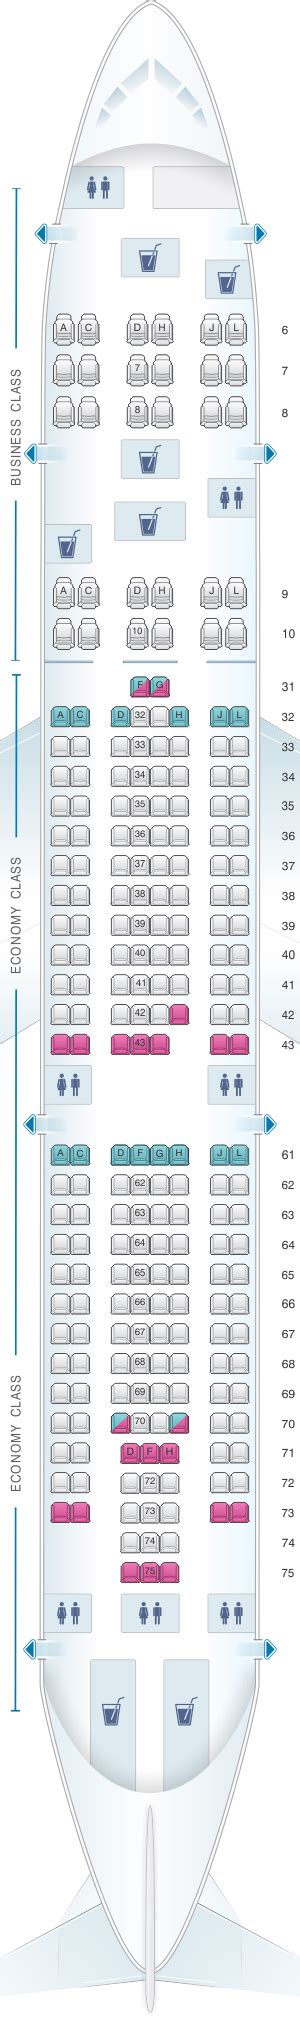 Seat Map China Eastern Airlines Airbus A330 200 Config2 Asiana